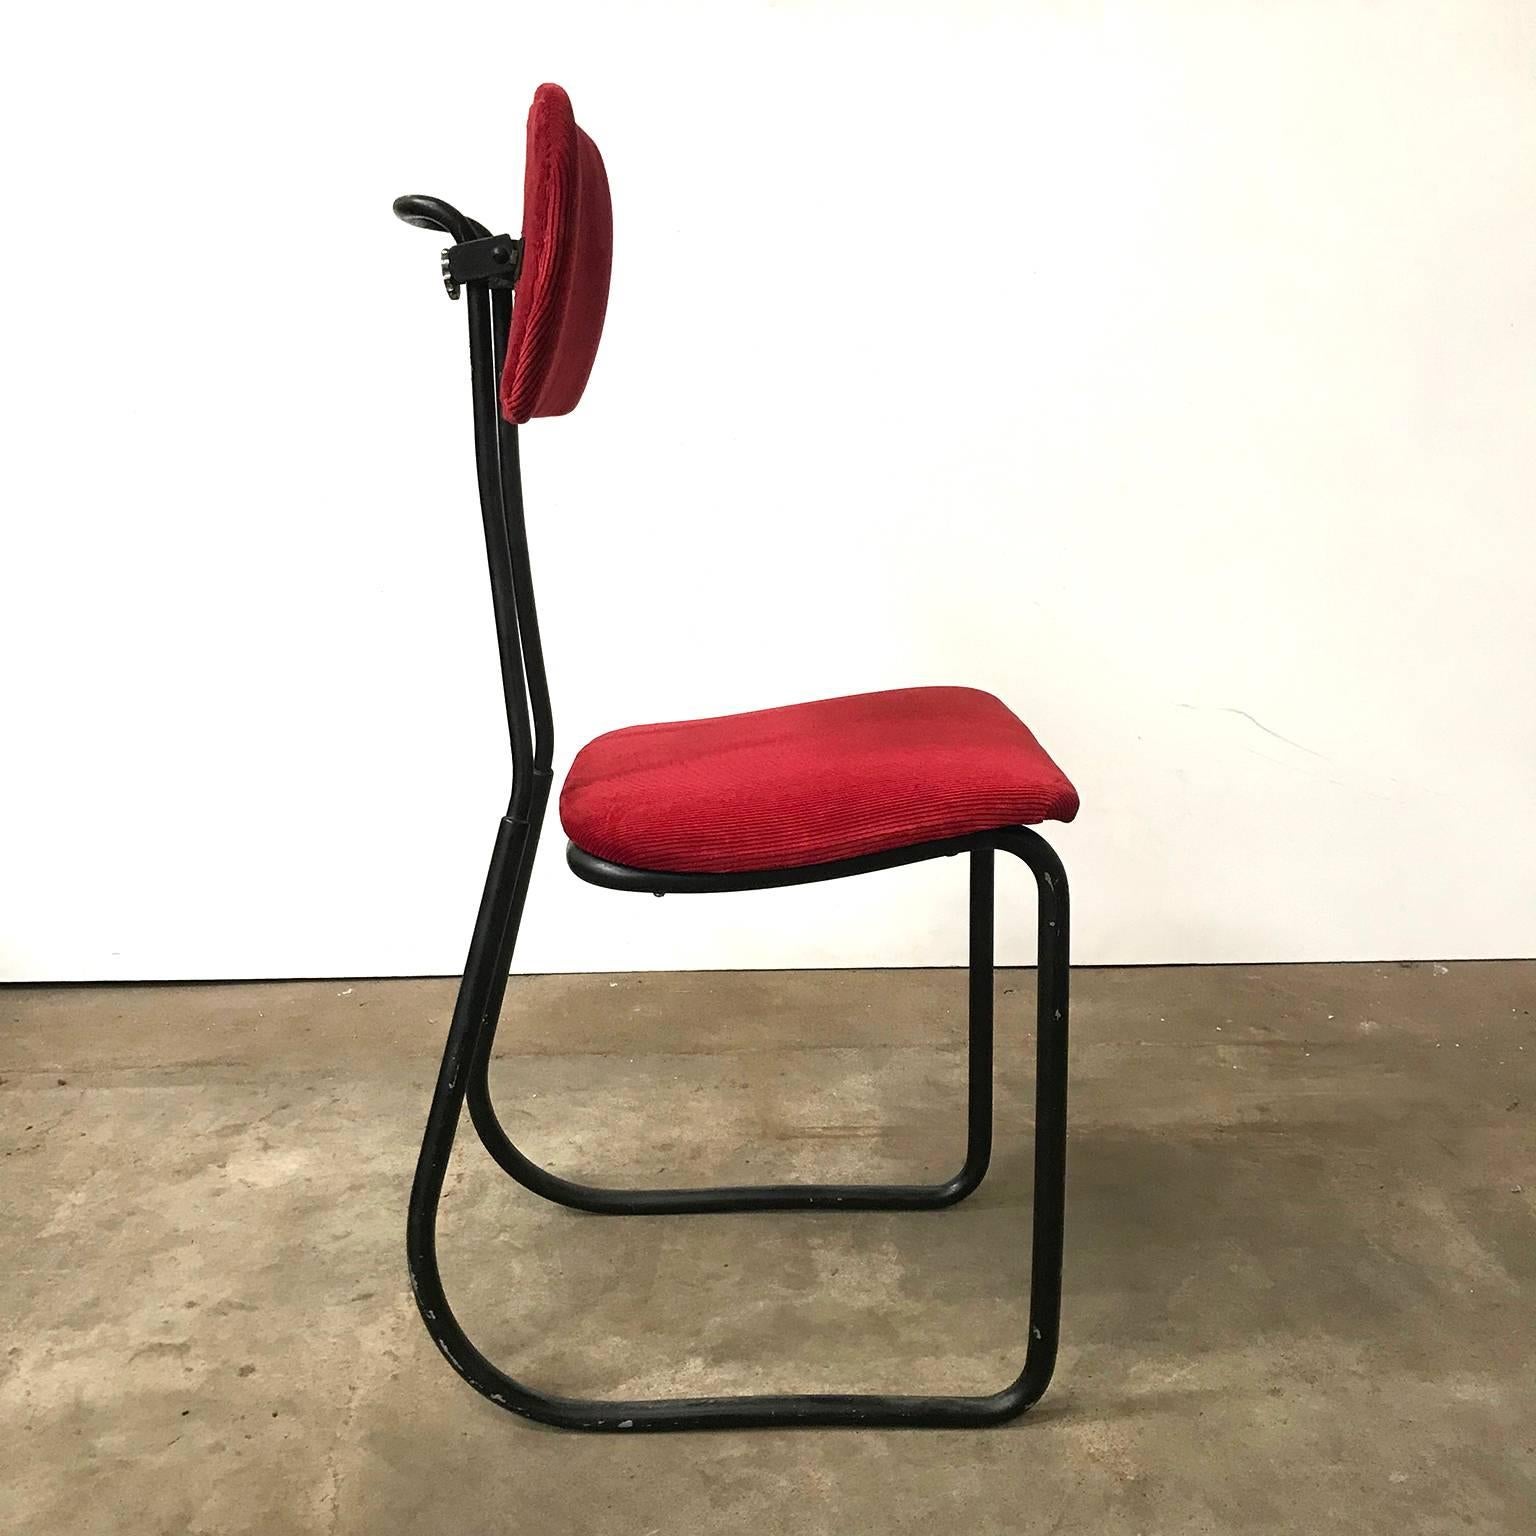 This typing chair in red Manchester upholstery has an elegant black base. The seat is not connected to the back. The backrest is adjustable in height as shown on picture #1 and #2. The upholstery is new and in excellent condition. The base shows